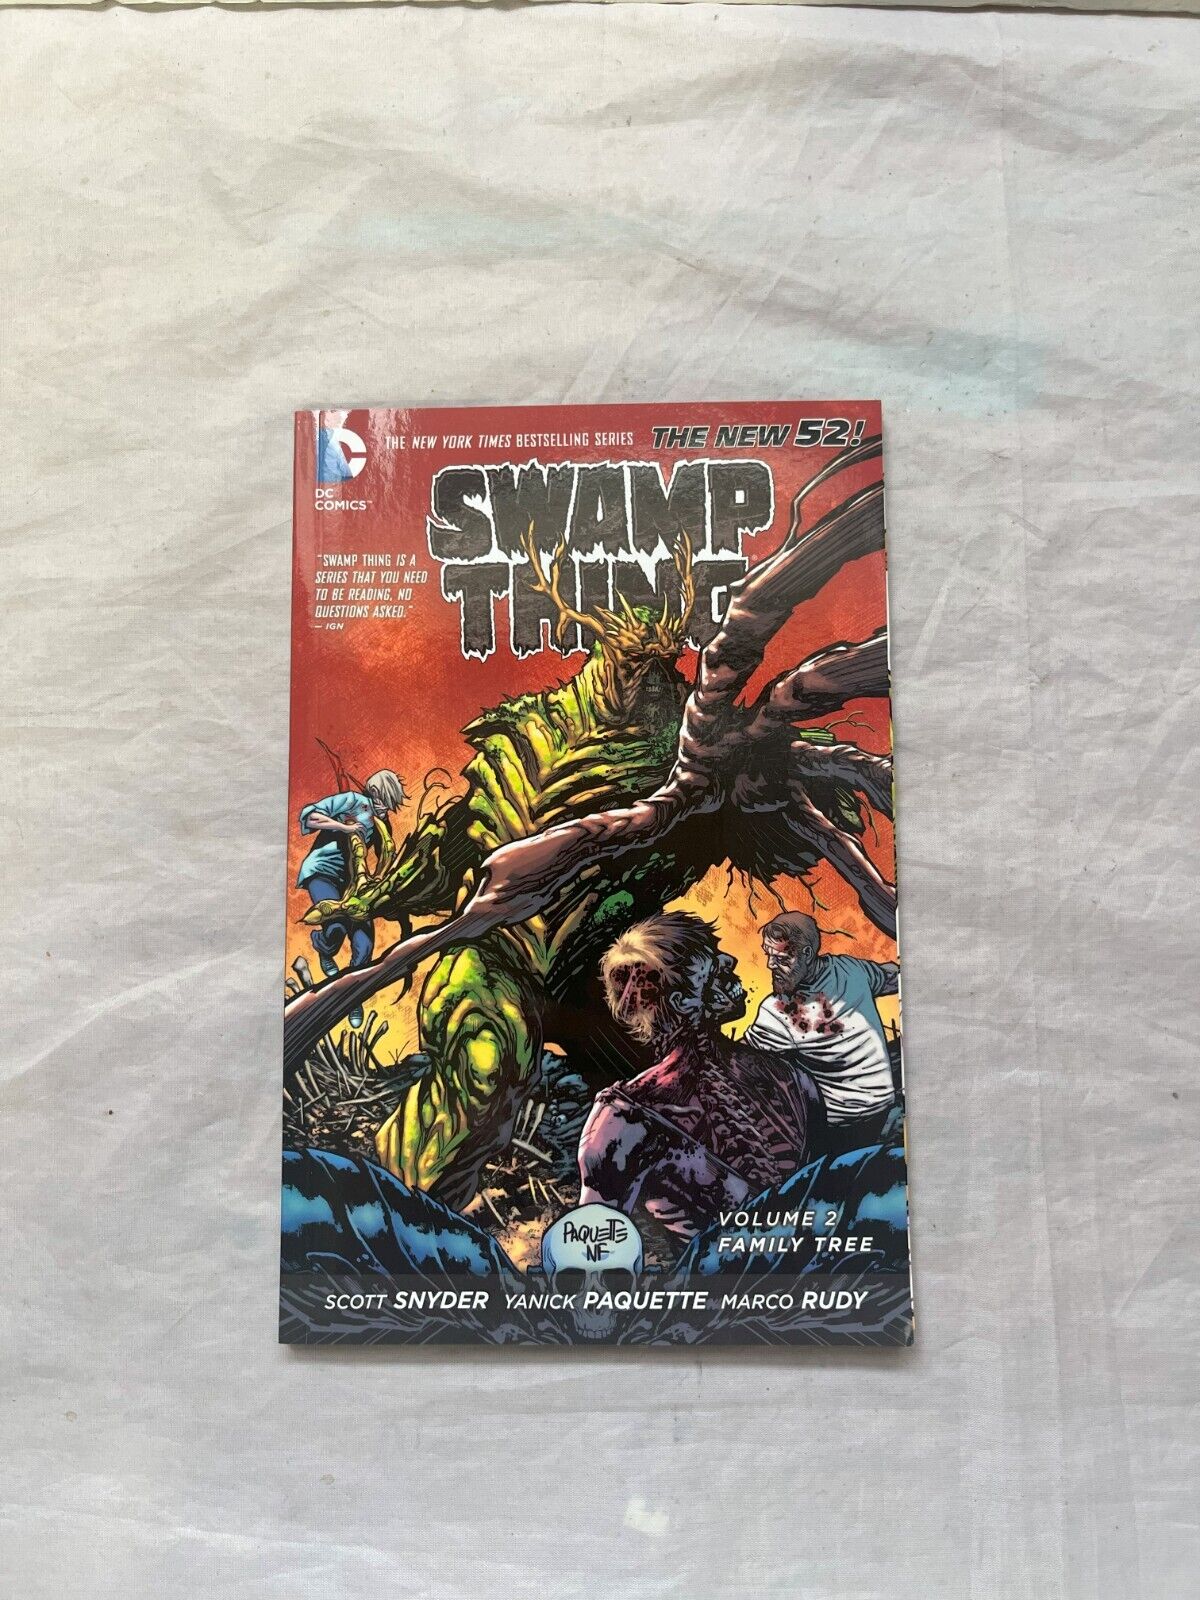 Swamp Thing Vol. 2: Family Tree (The New 52) by Scott Snyder